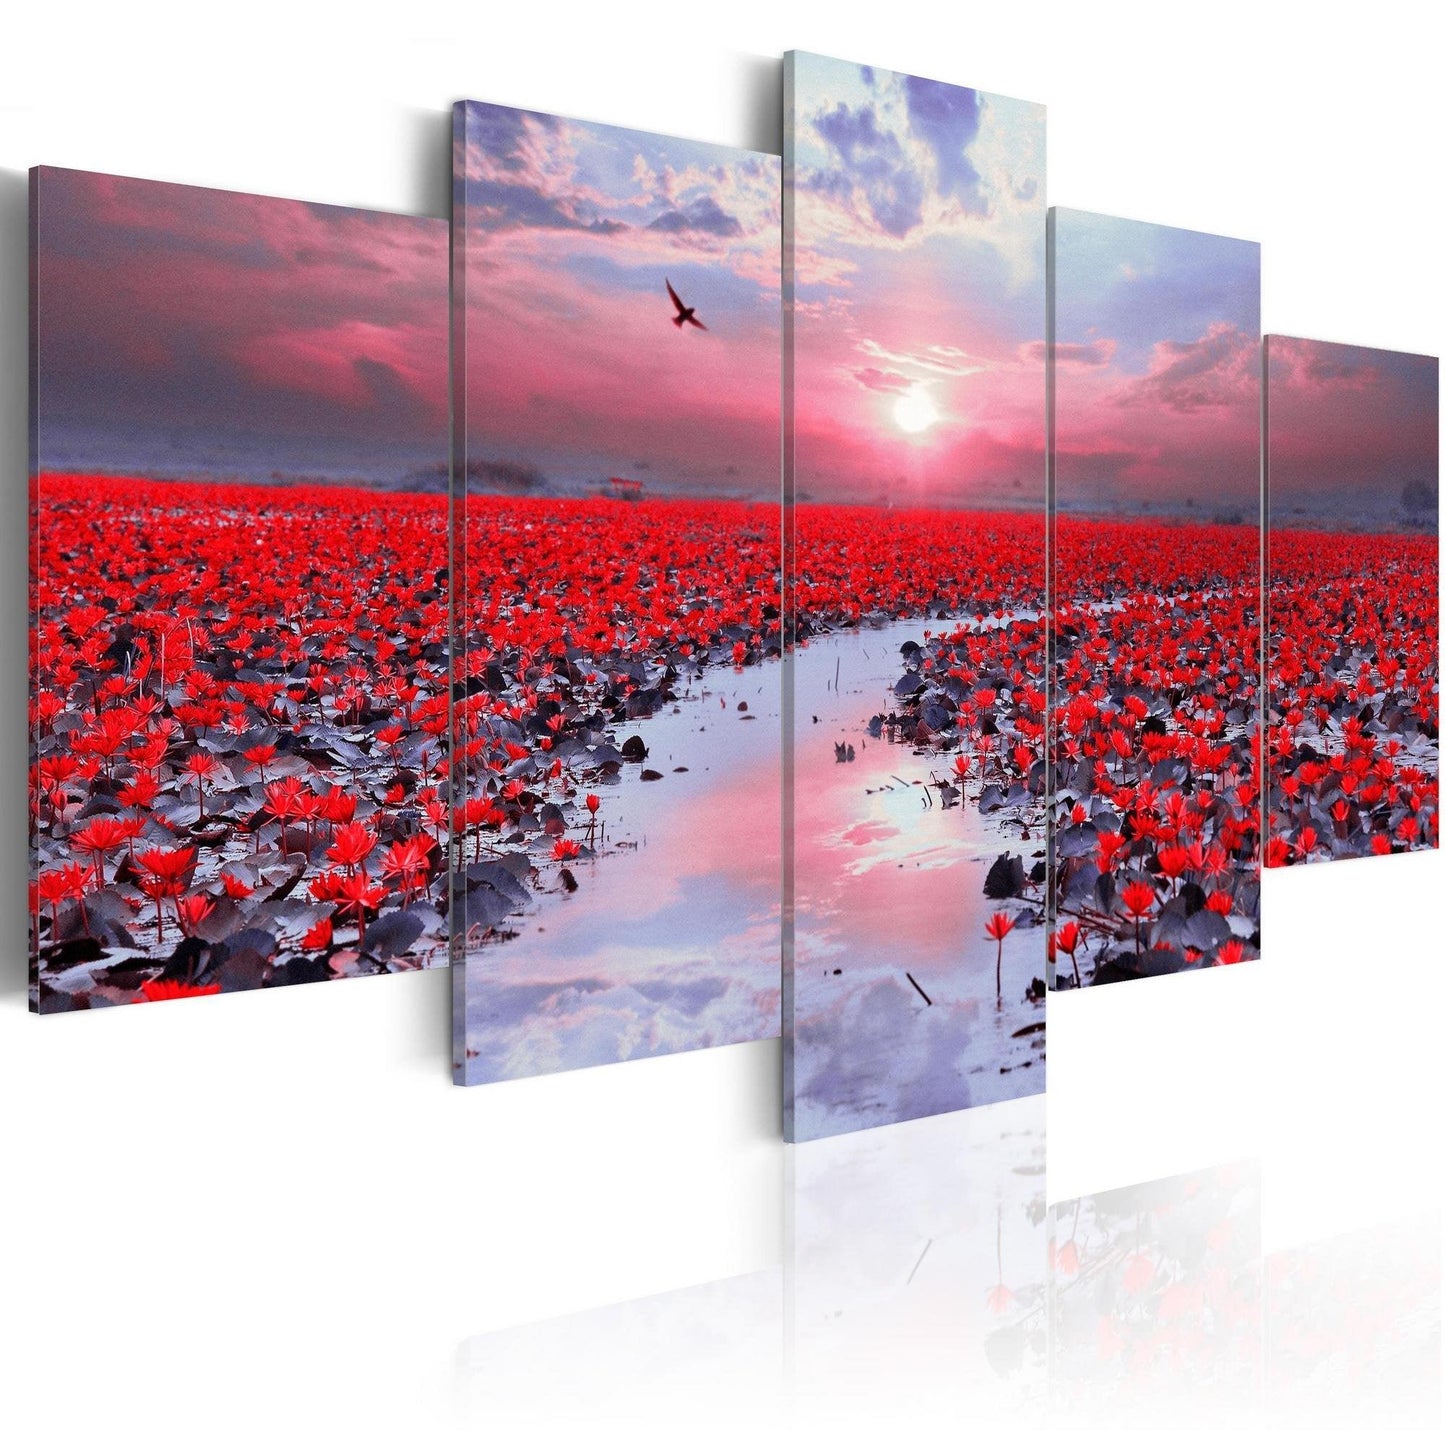 Canvas Print - The River of Love - www.trendingbestsellers.com